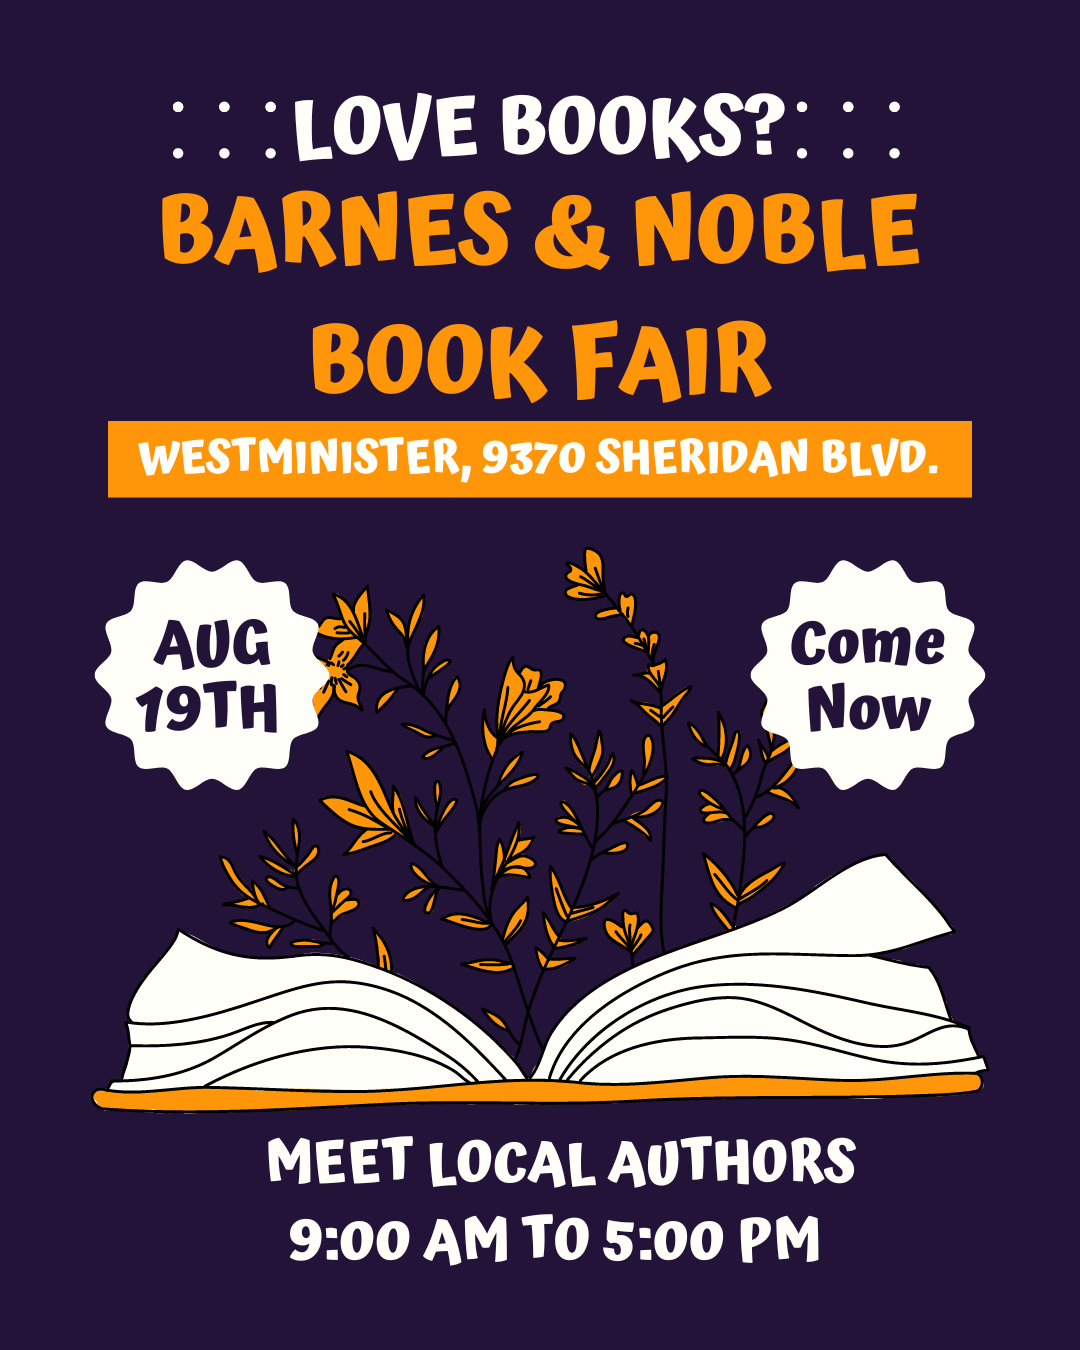 AUG 19 WESTMINSTER, CO BARNES & NOBLE BOOK FAIR #COLORADO #BOOKS #GIFTS #WEEKEND #BOOKREADERS #AUTHOREVENT @judithbriles @BNBuzz